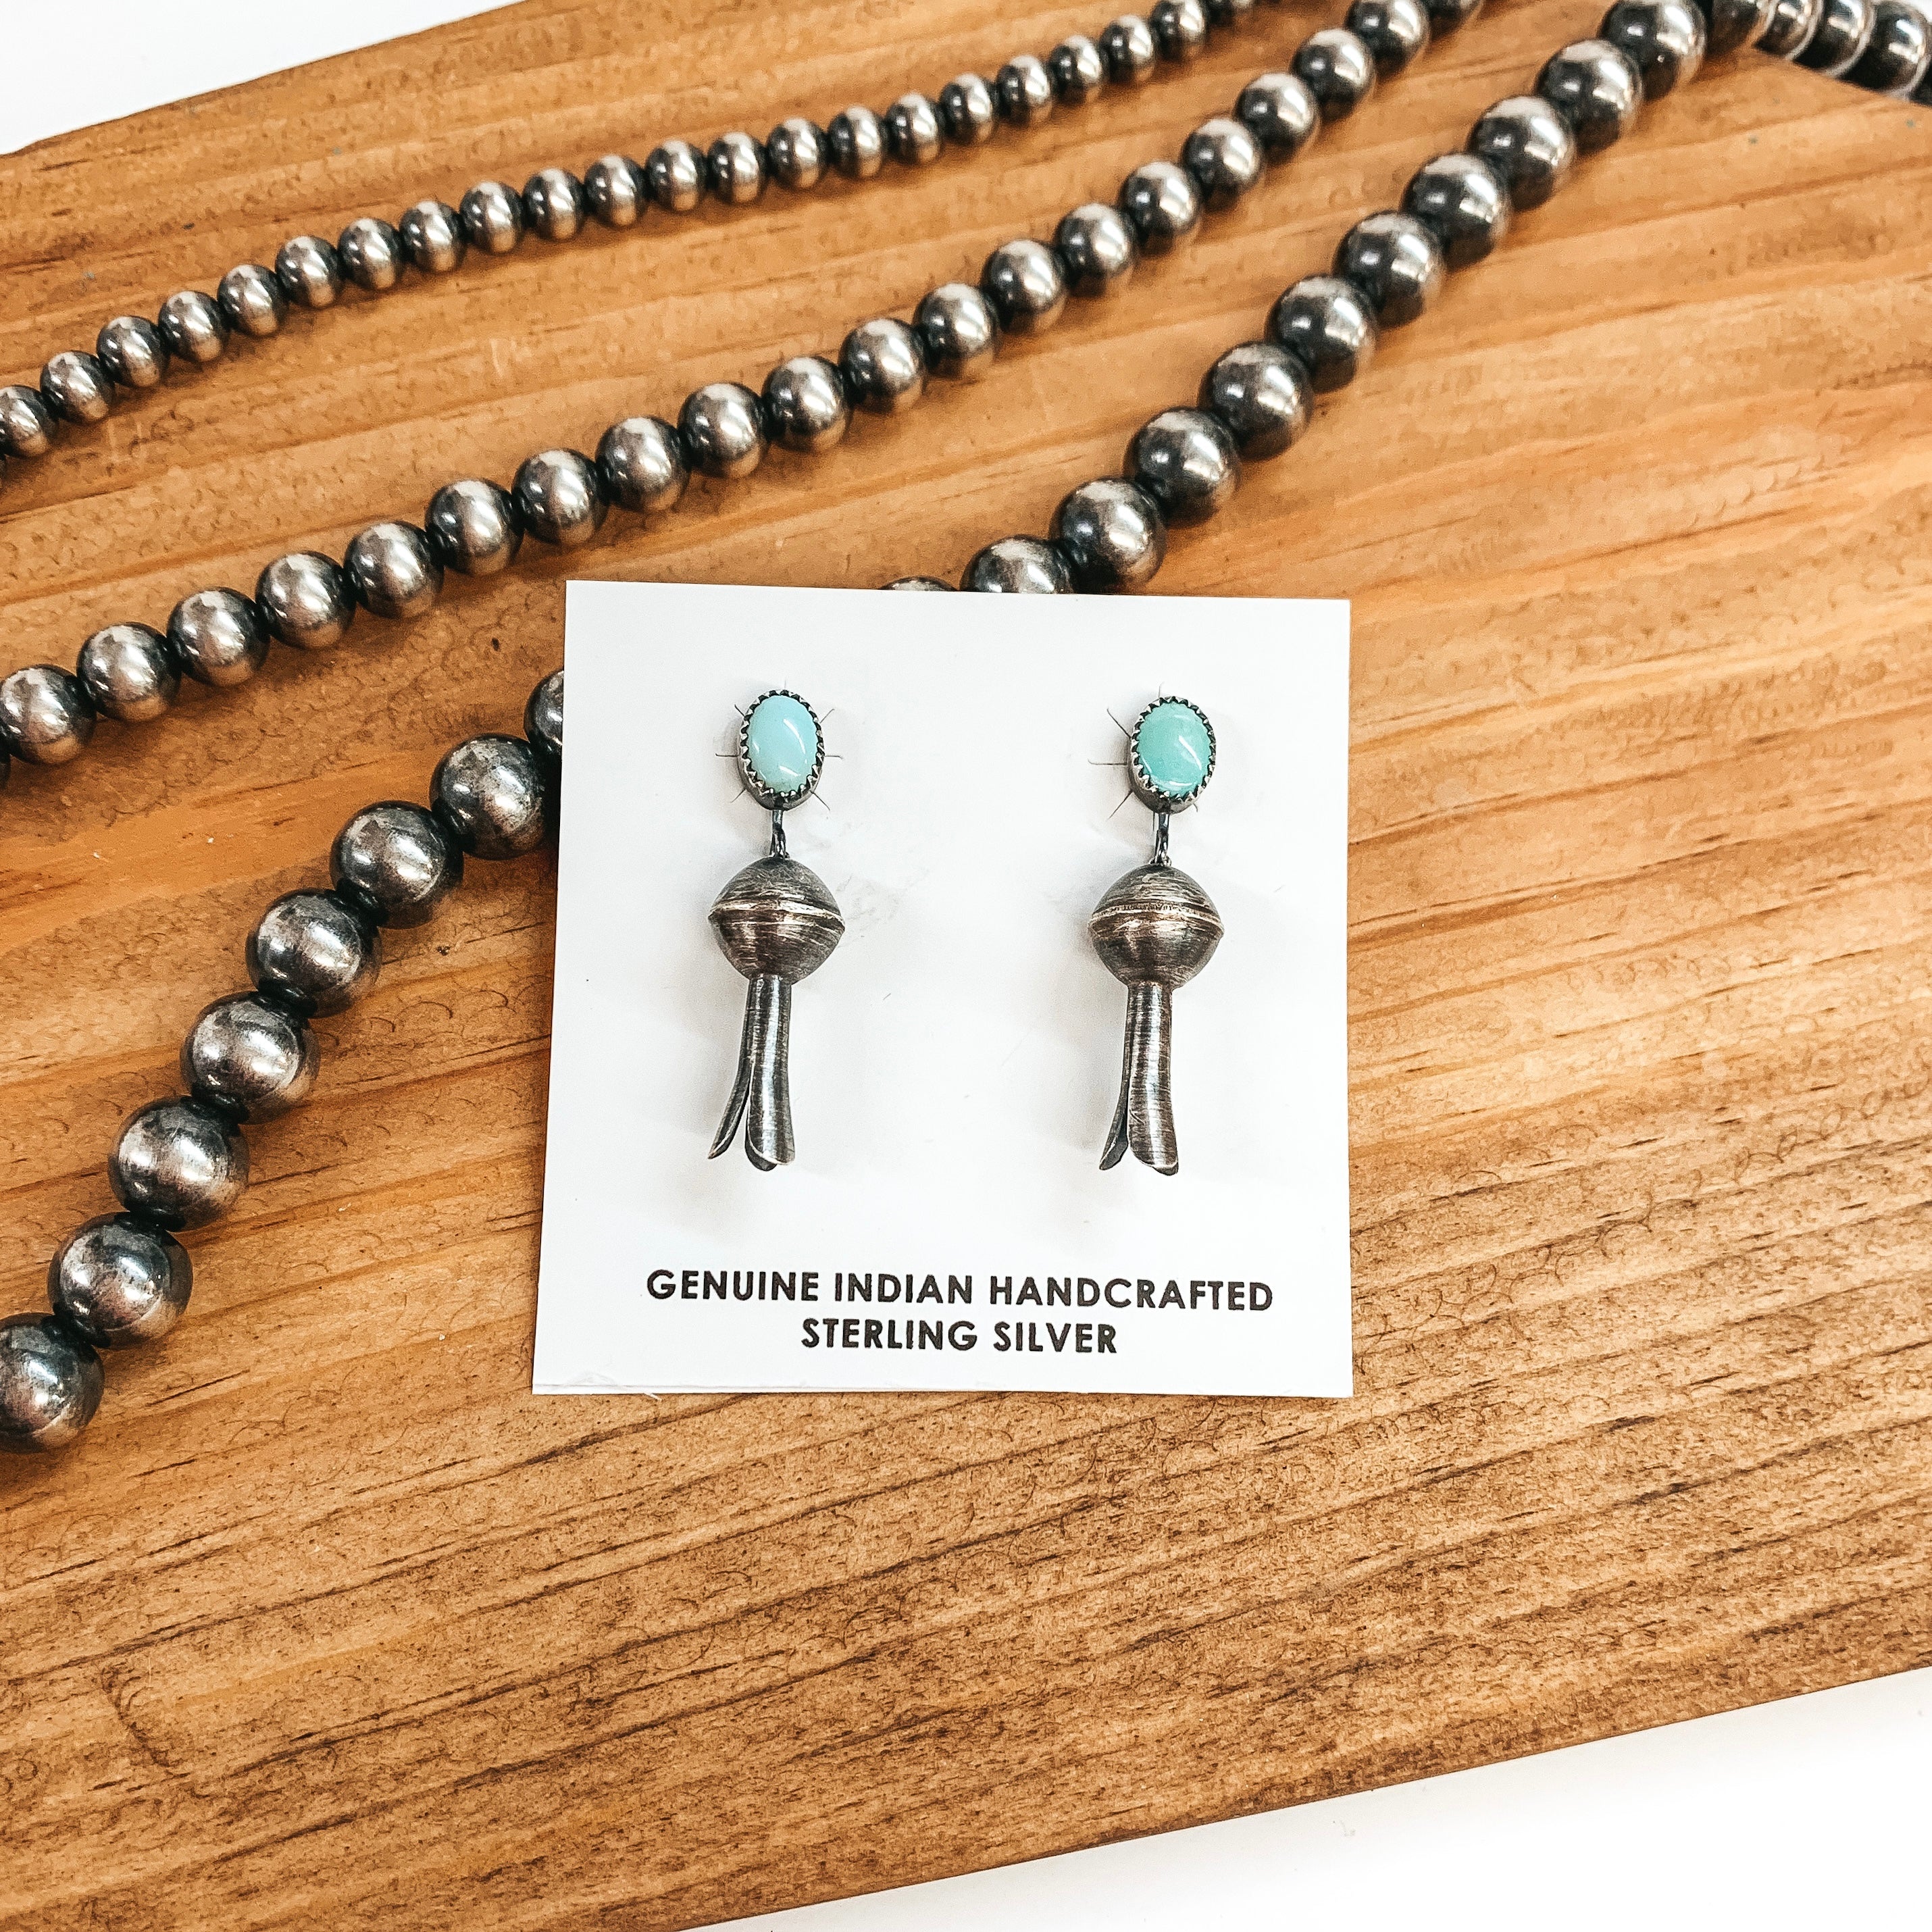 Navajo | Navajo Handmade Sterling Silver Squash Blossom Earrings with Turquoise Stone Posts - Giddy Up Glamour Boutique